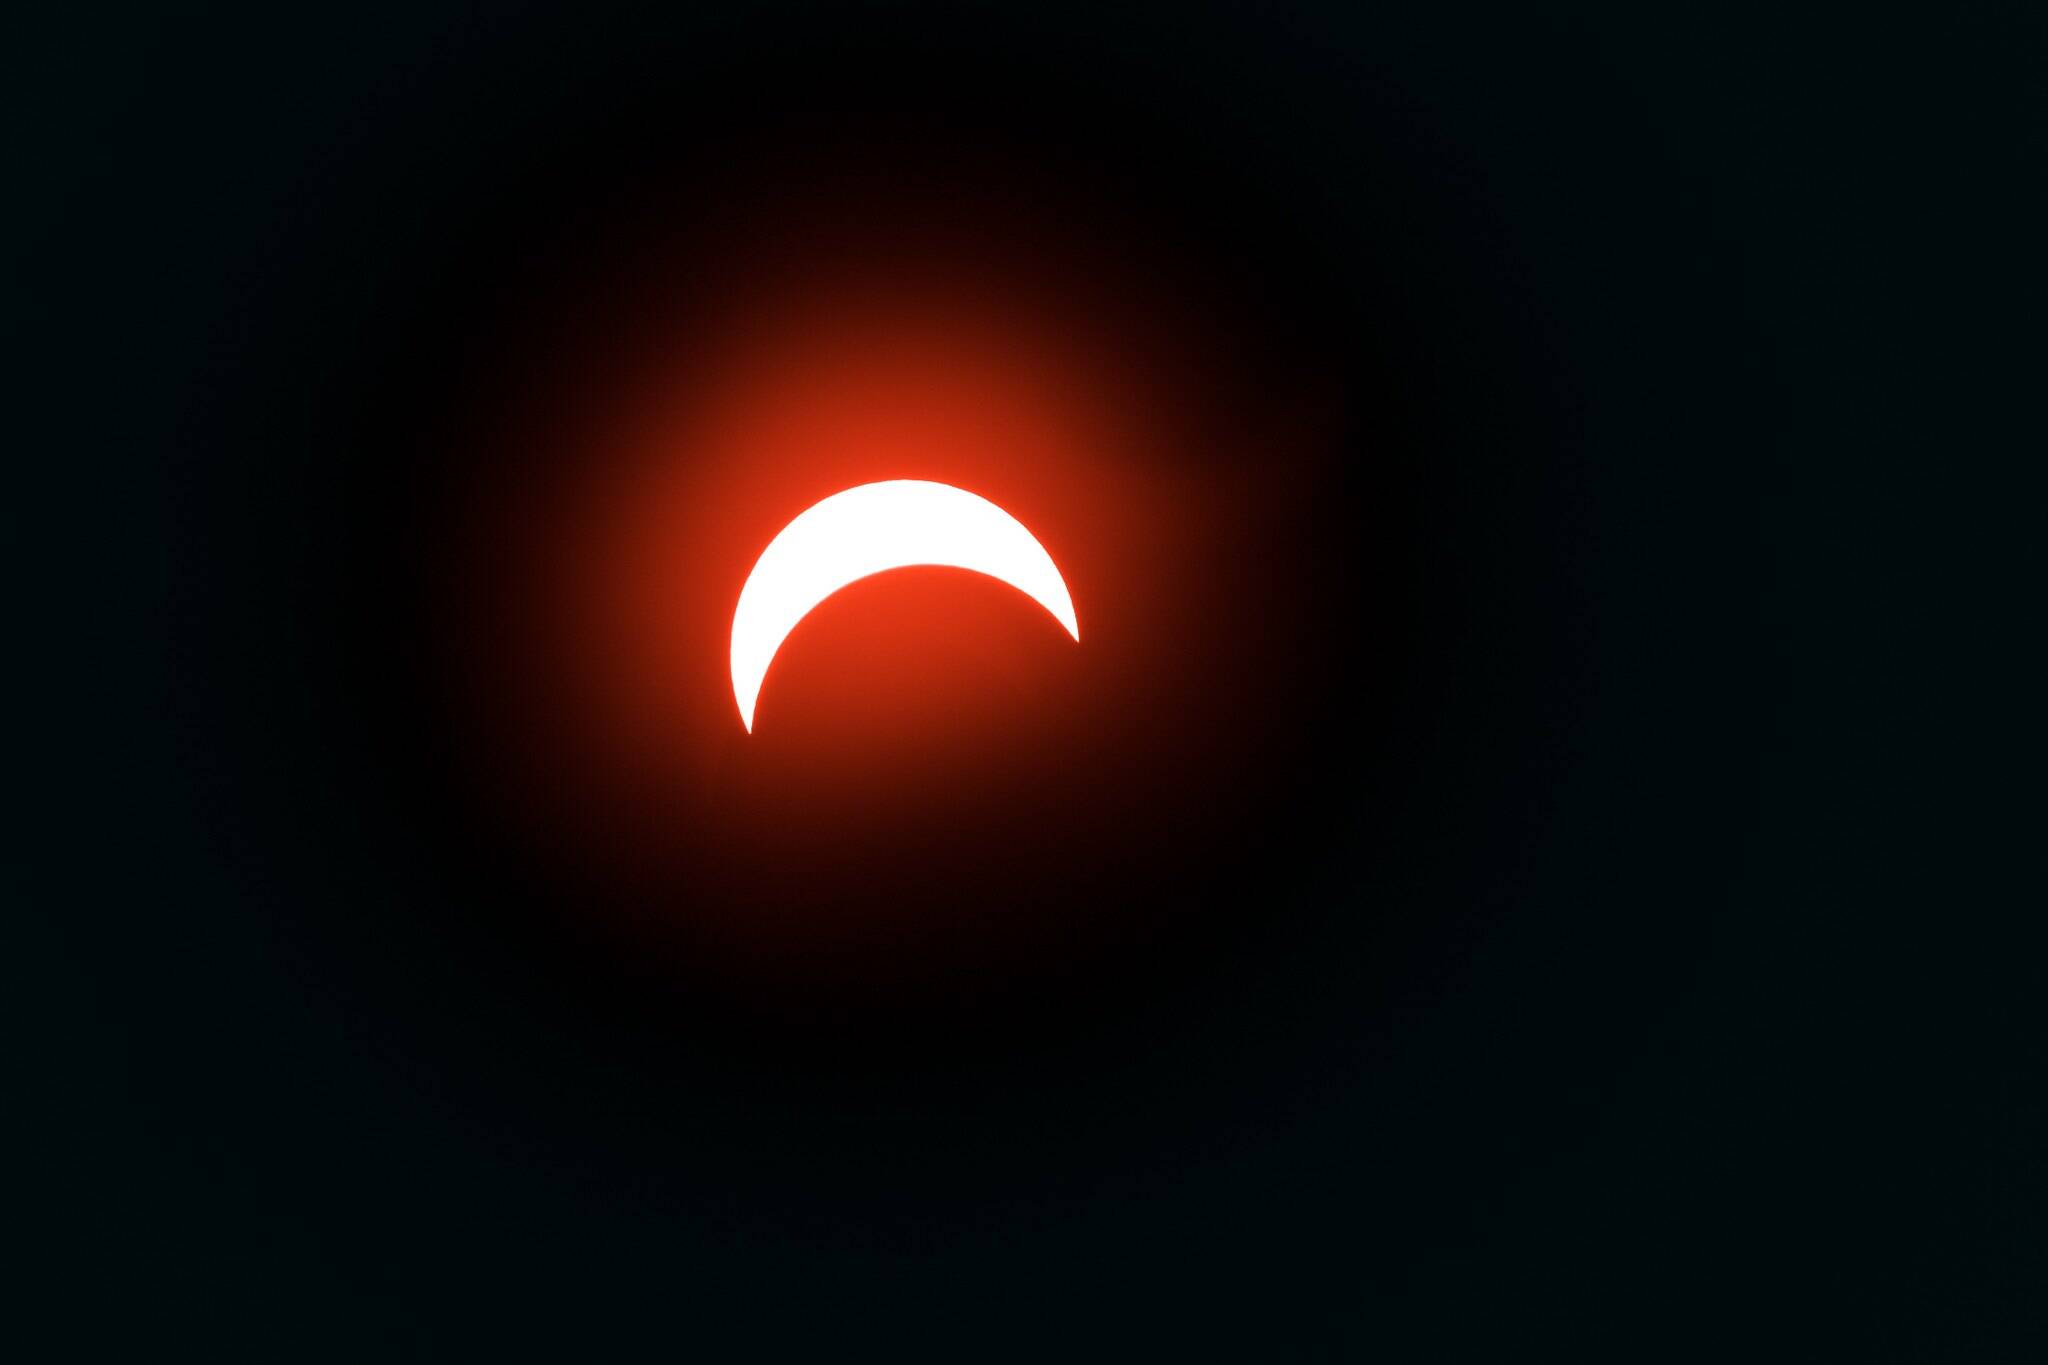 Toronto about to see a rare solar eclipse and it won't happen again